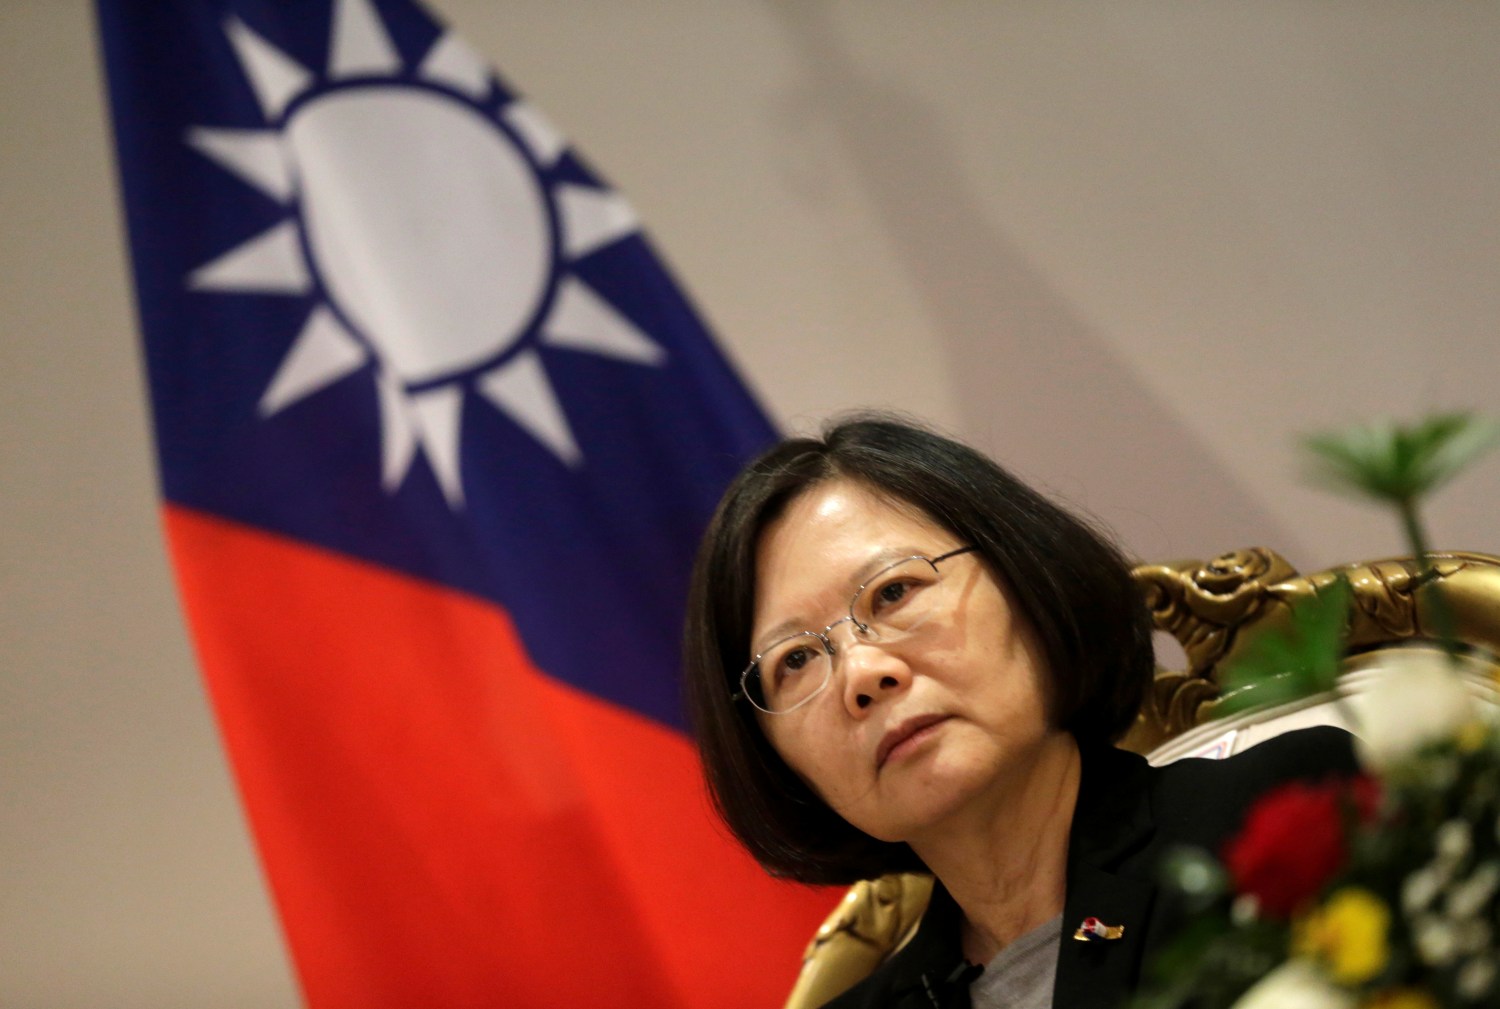 Taiwan's President Tsai Ing-wen speaks during an interview in Luque, Paraguay, June 28, 2016.